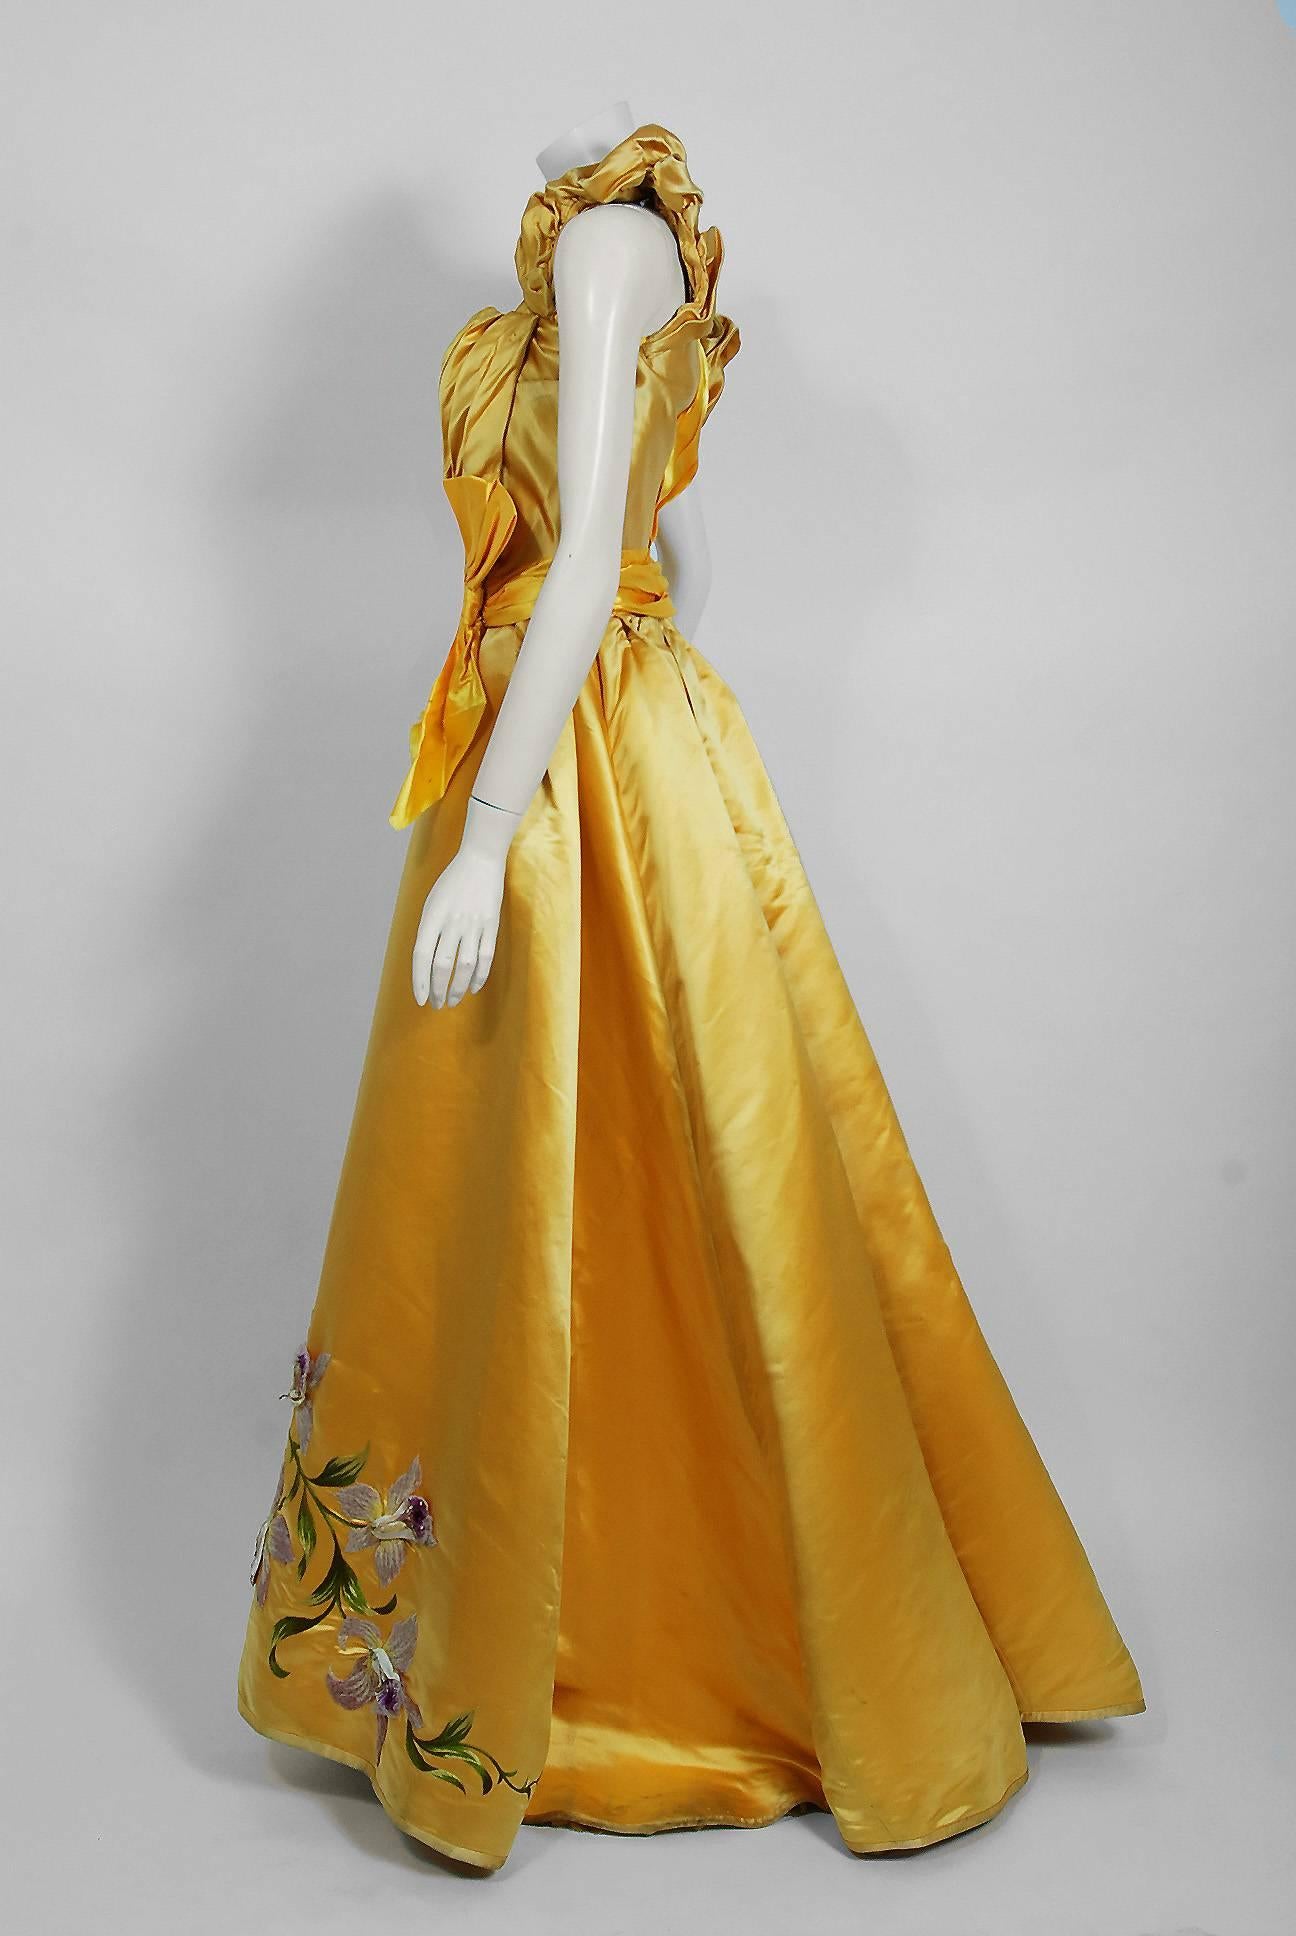 Undiminished by time, this Mme Arnaud on 16 Rue Bassano Paris couture ensemble  from the Victorian era still casts its seductive spell. An exceptional evening ensemble fashioned from vibrant sunshine yellow silk-satin. The gorgeous three-dimensional